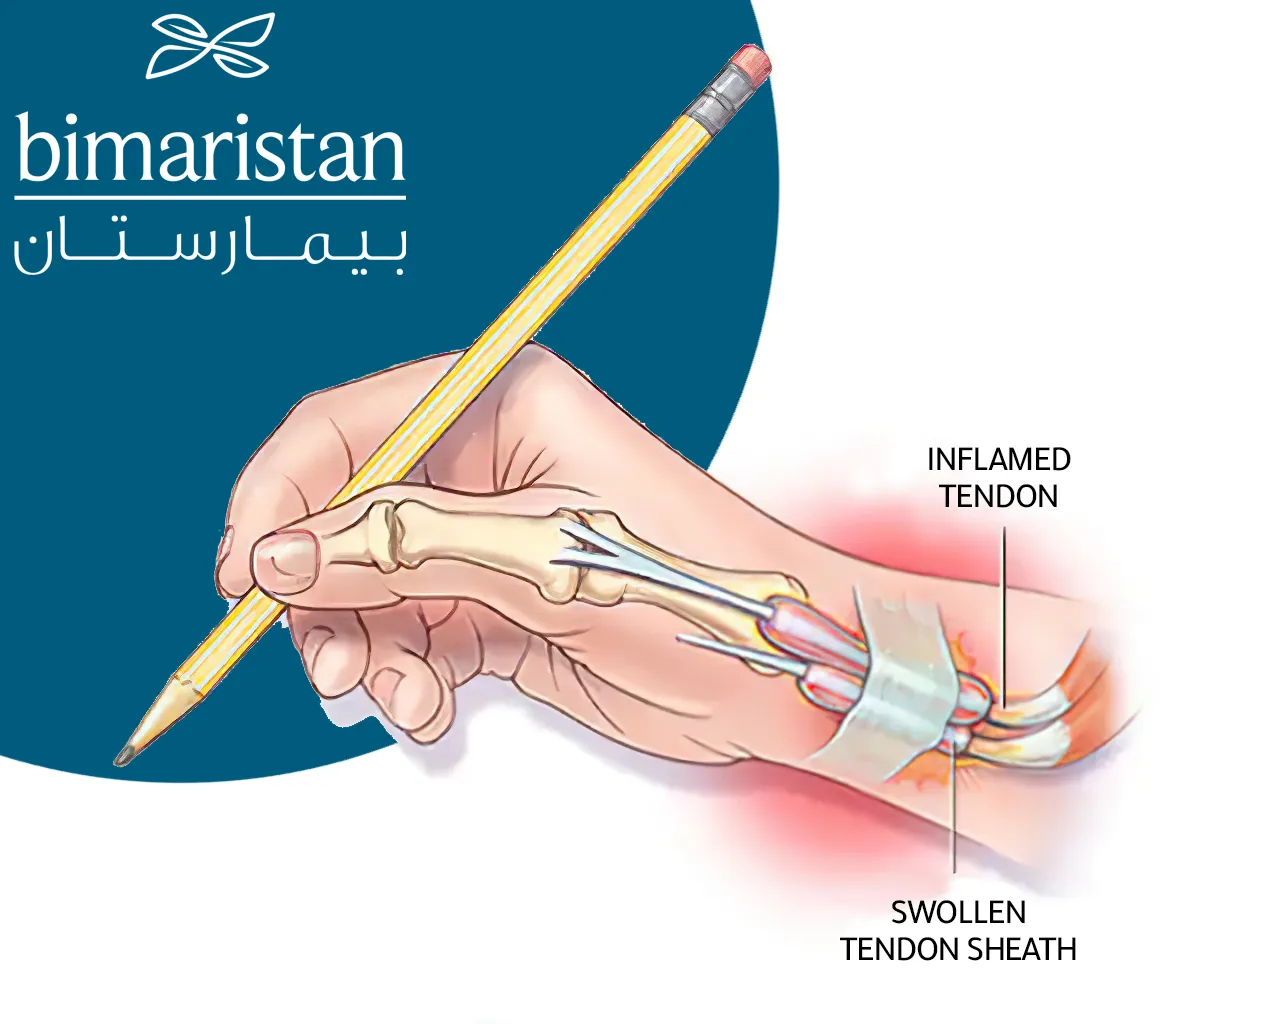 Image showing hand tendinitis, which is often caused by excessive use of the hands